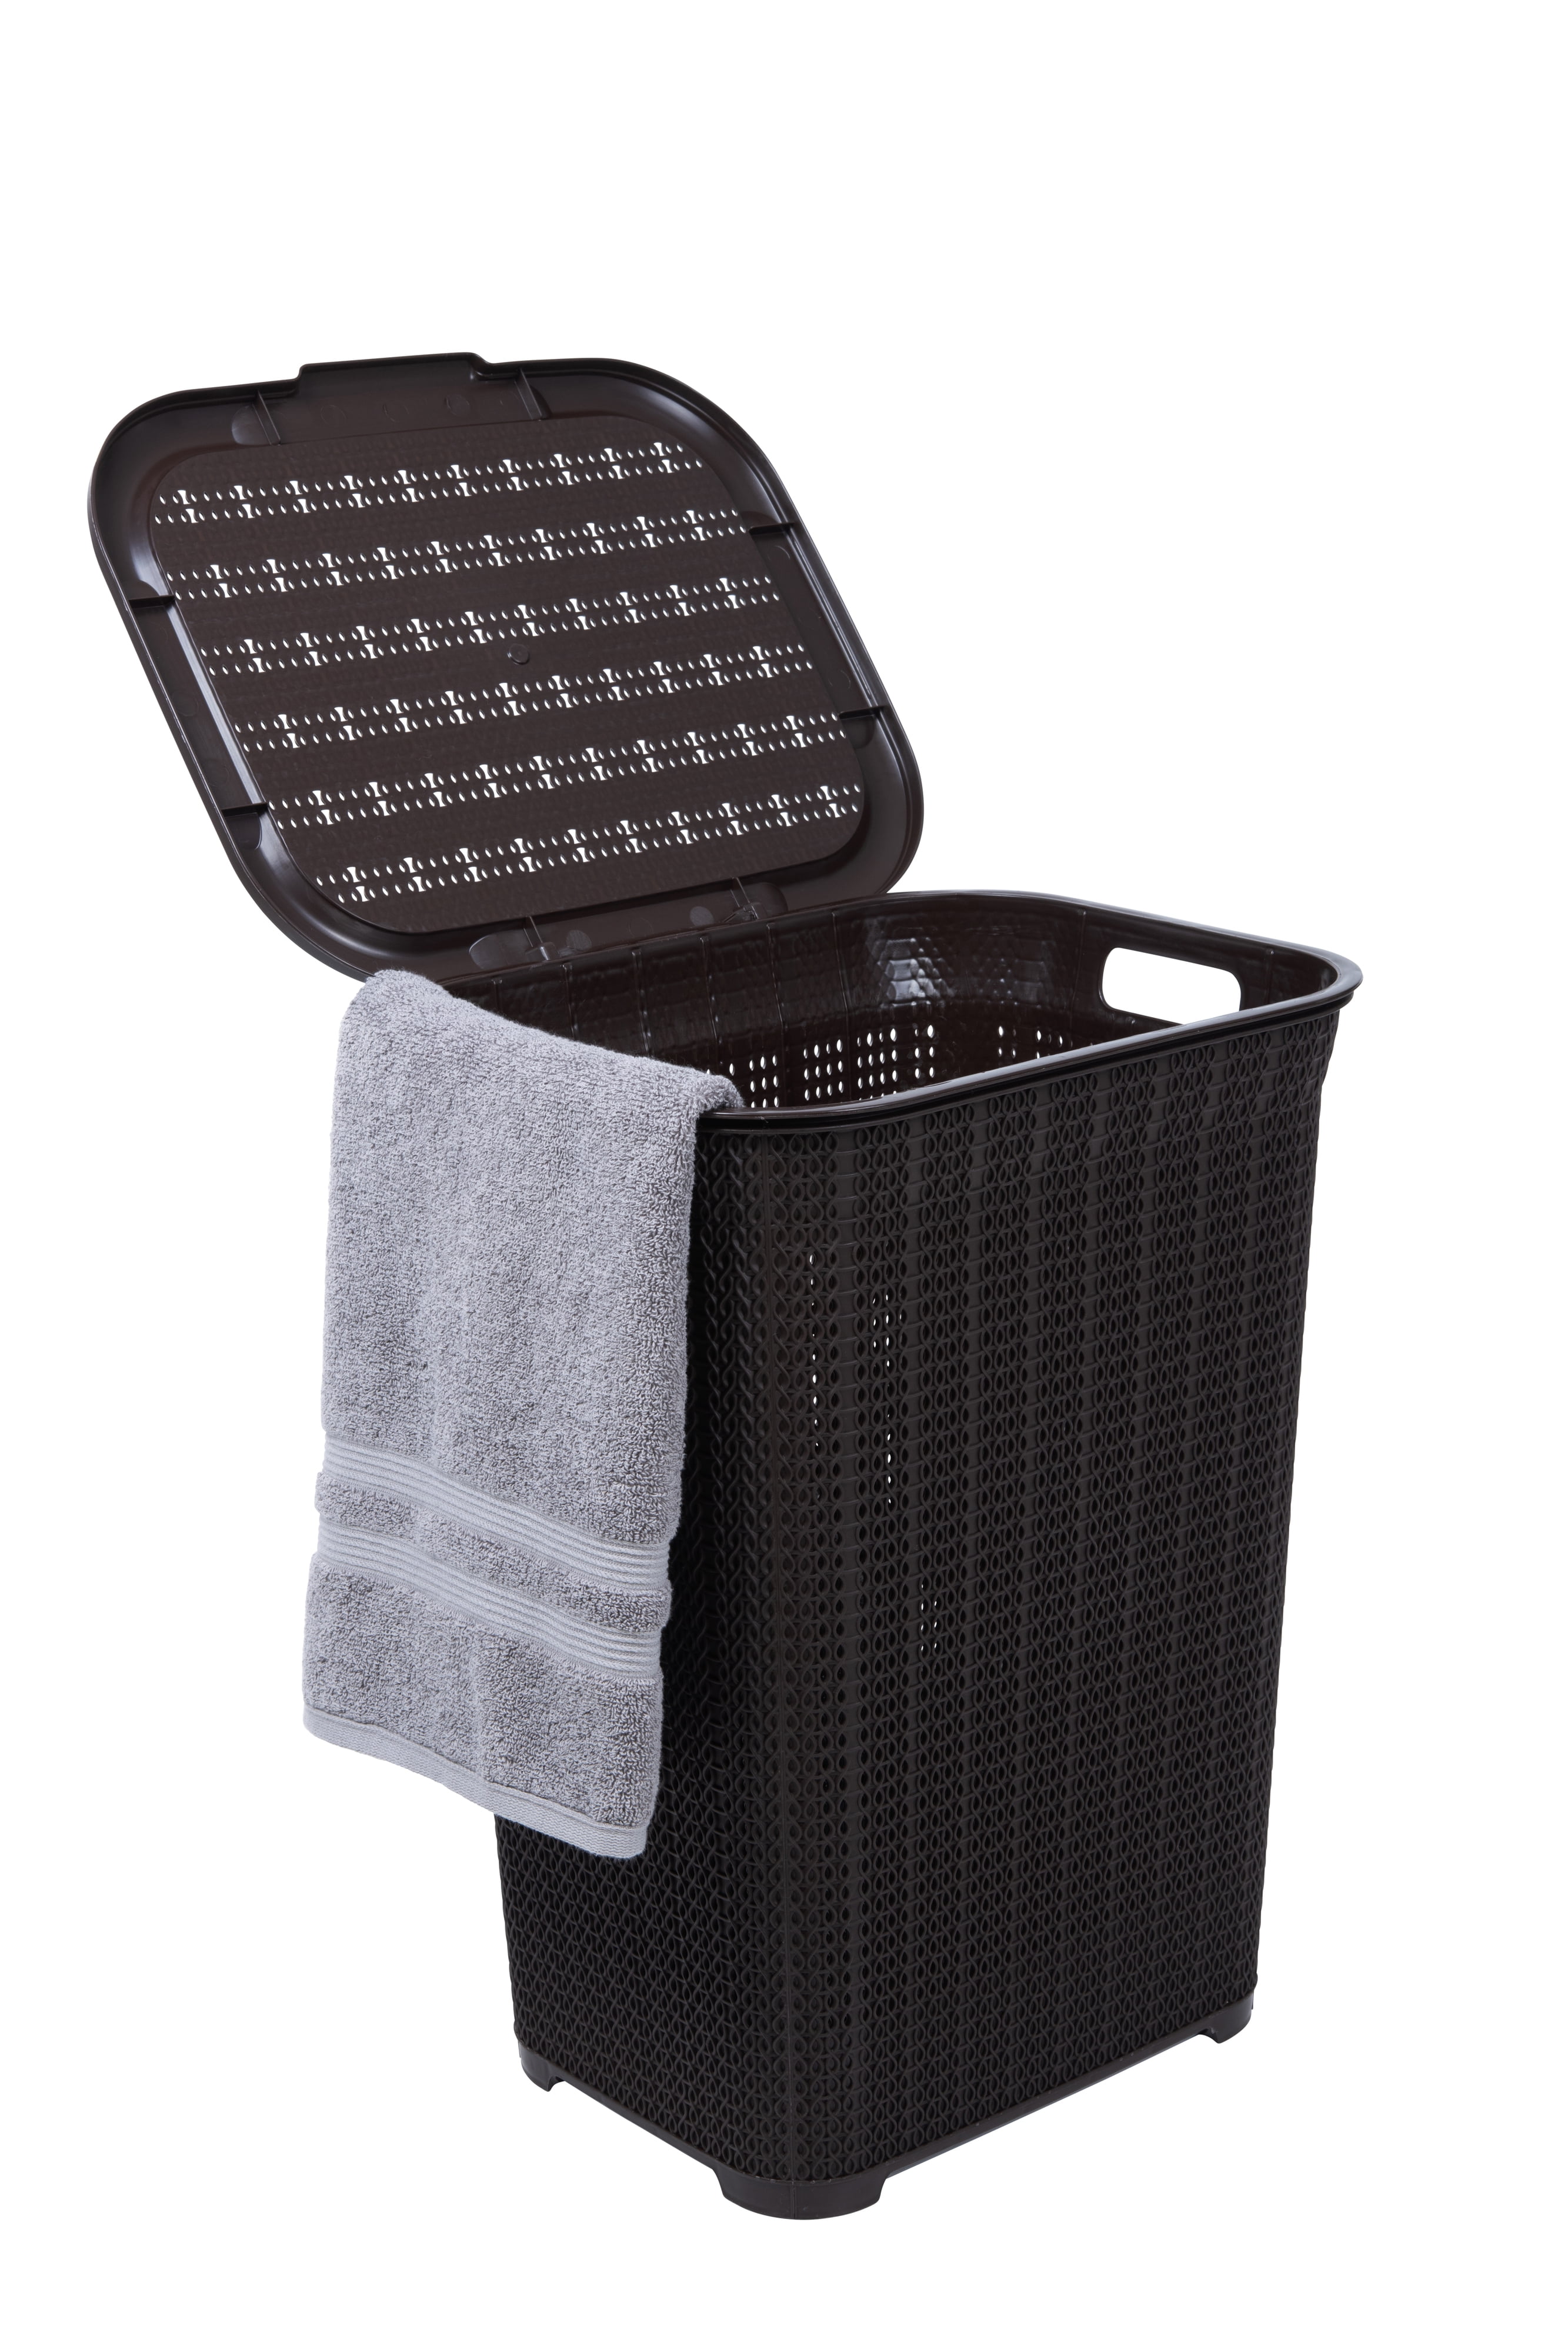 Superio Laundry Hamper with Lid Brown, 50 Liter Knit Laundry Hamper ...